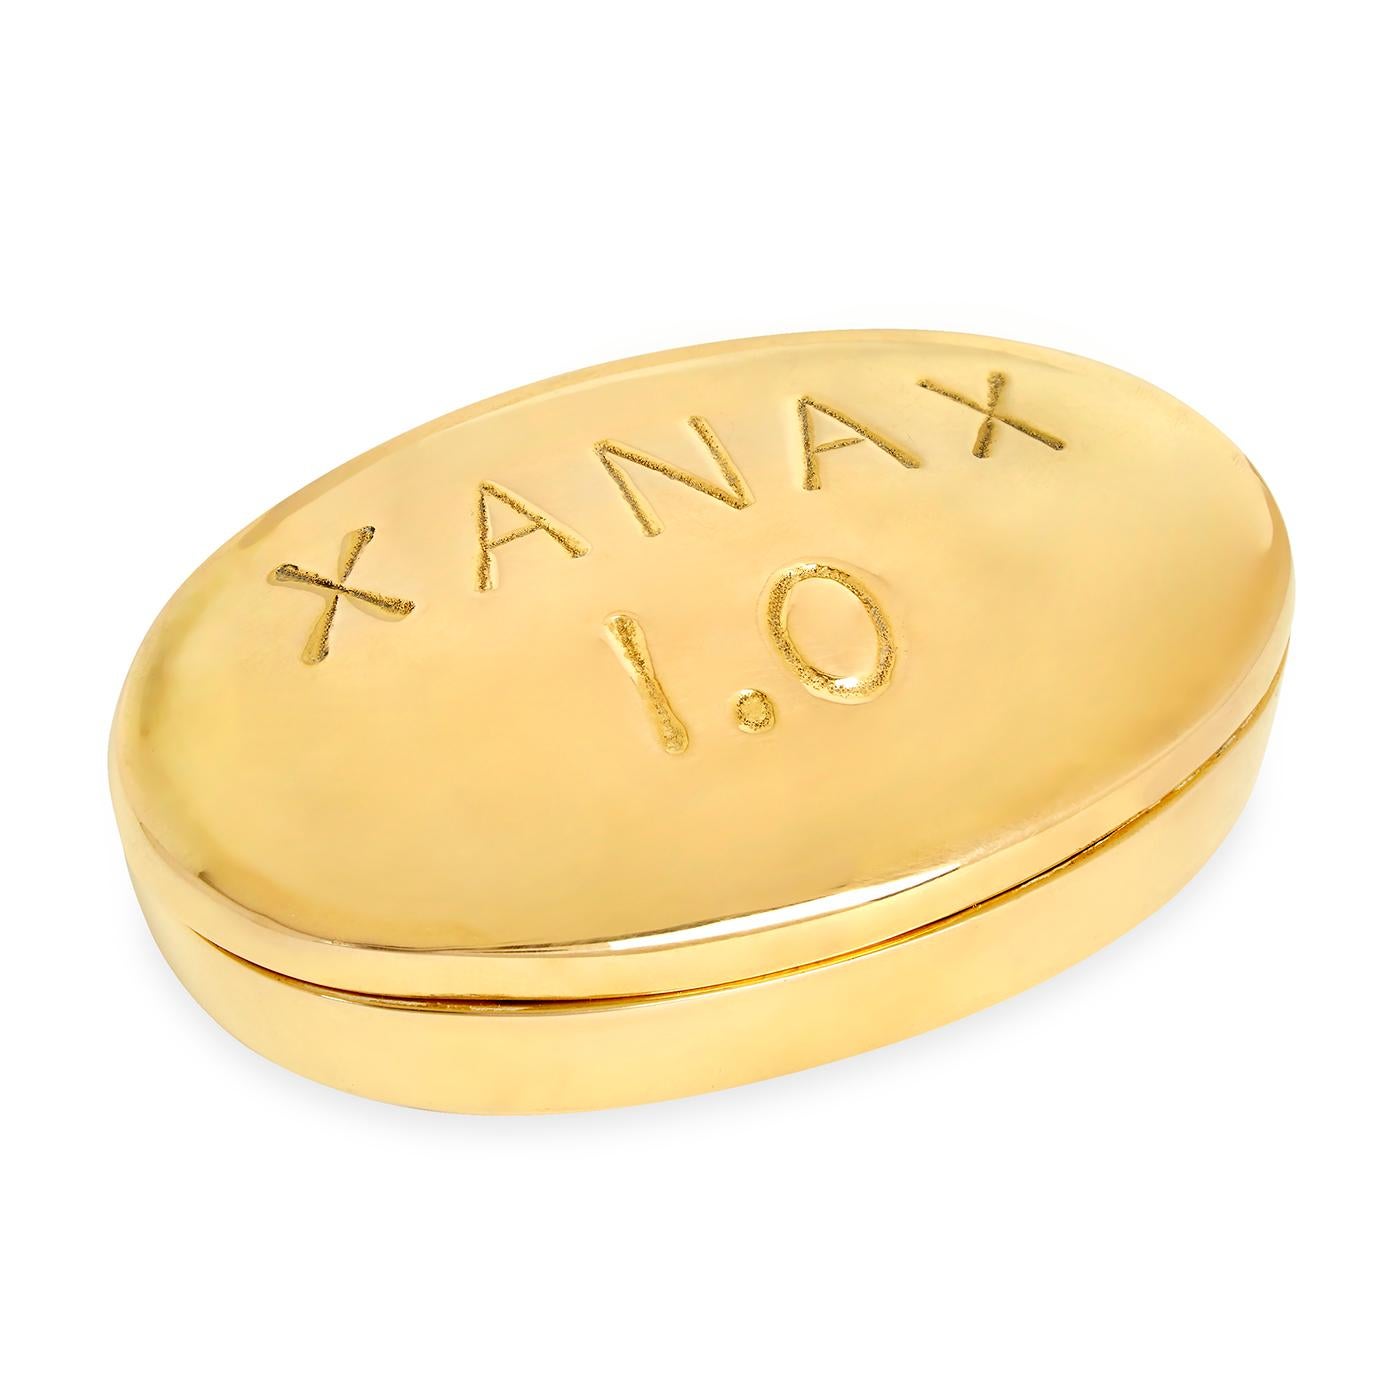 A dose of style. We've taken our longtime love of pharmaceuticals to a new level of luxe. Cast in solid brass, our hinged pill boxes are the perfect place to stash your stash. Each pill is laser-etched with its mg size so you can manage your dosage.